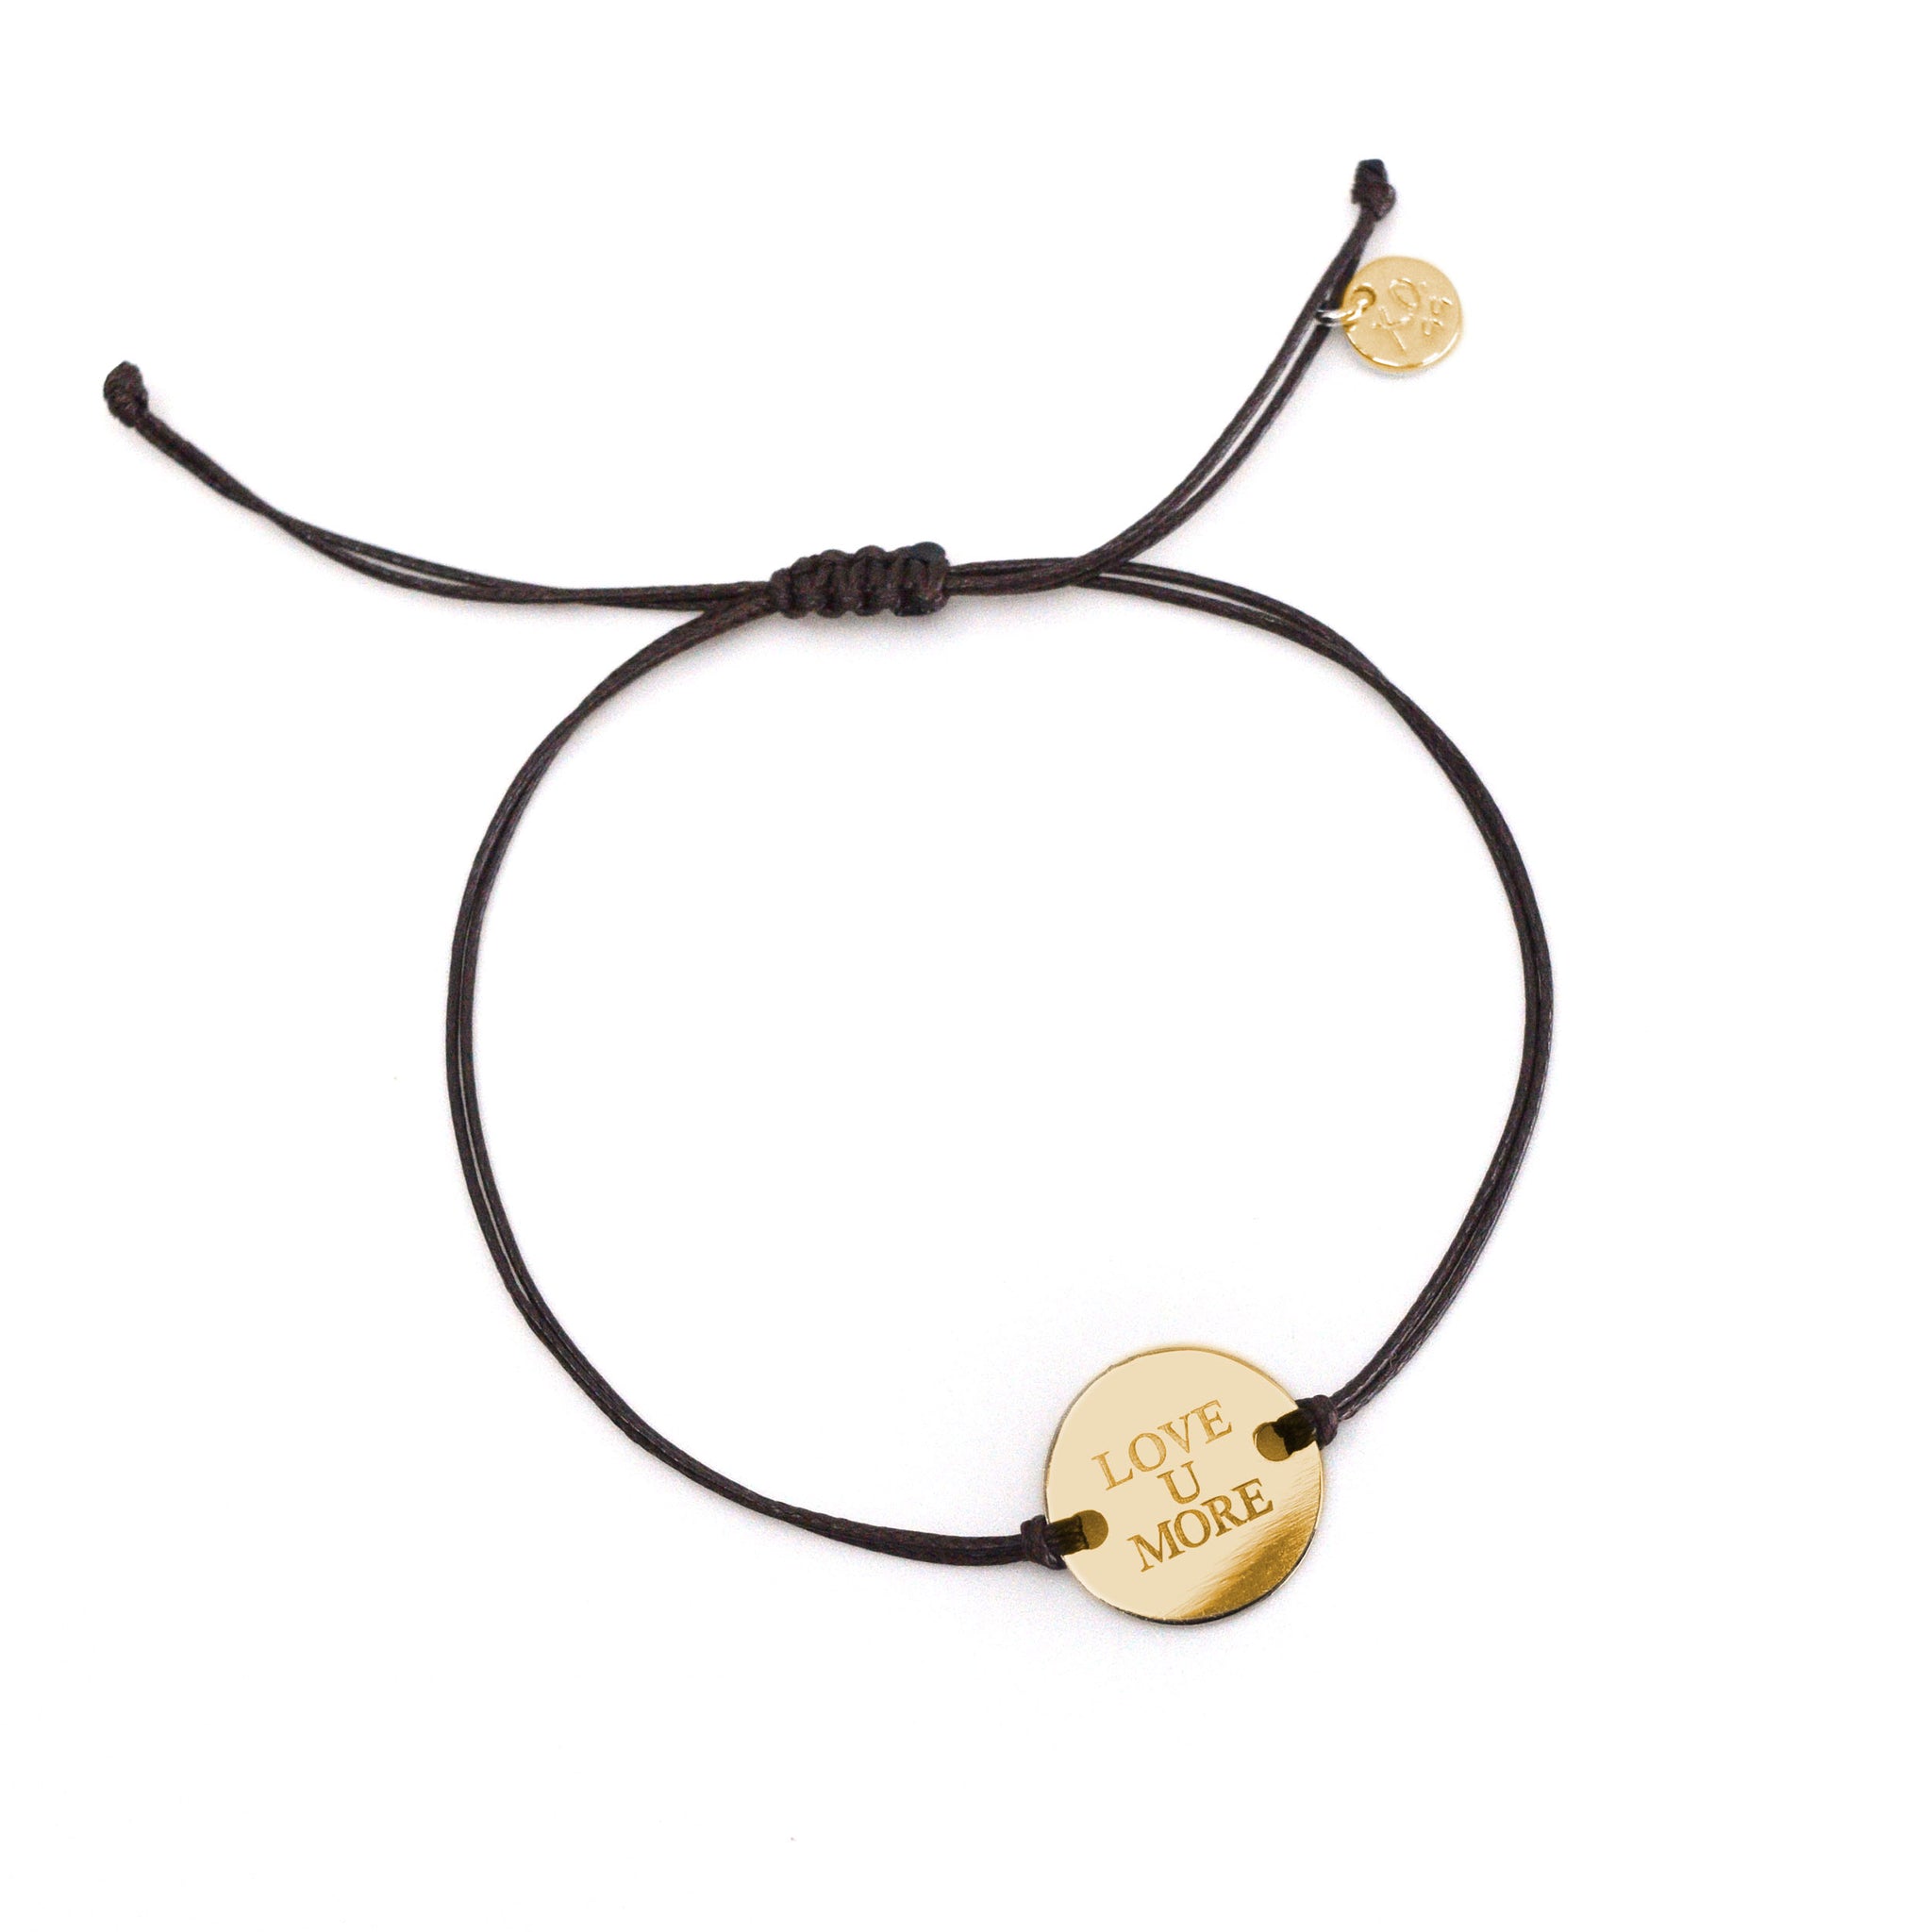 Savannah Cord Bracelet with Love You More Coin